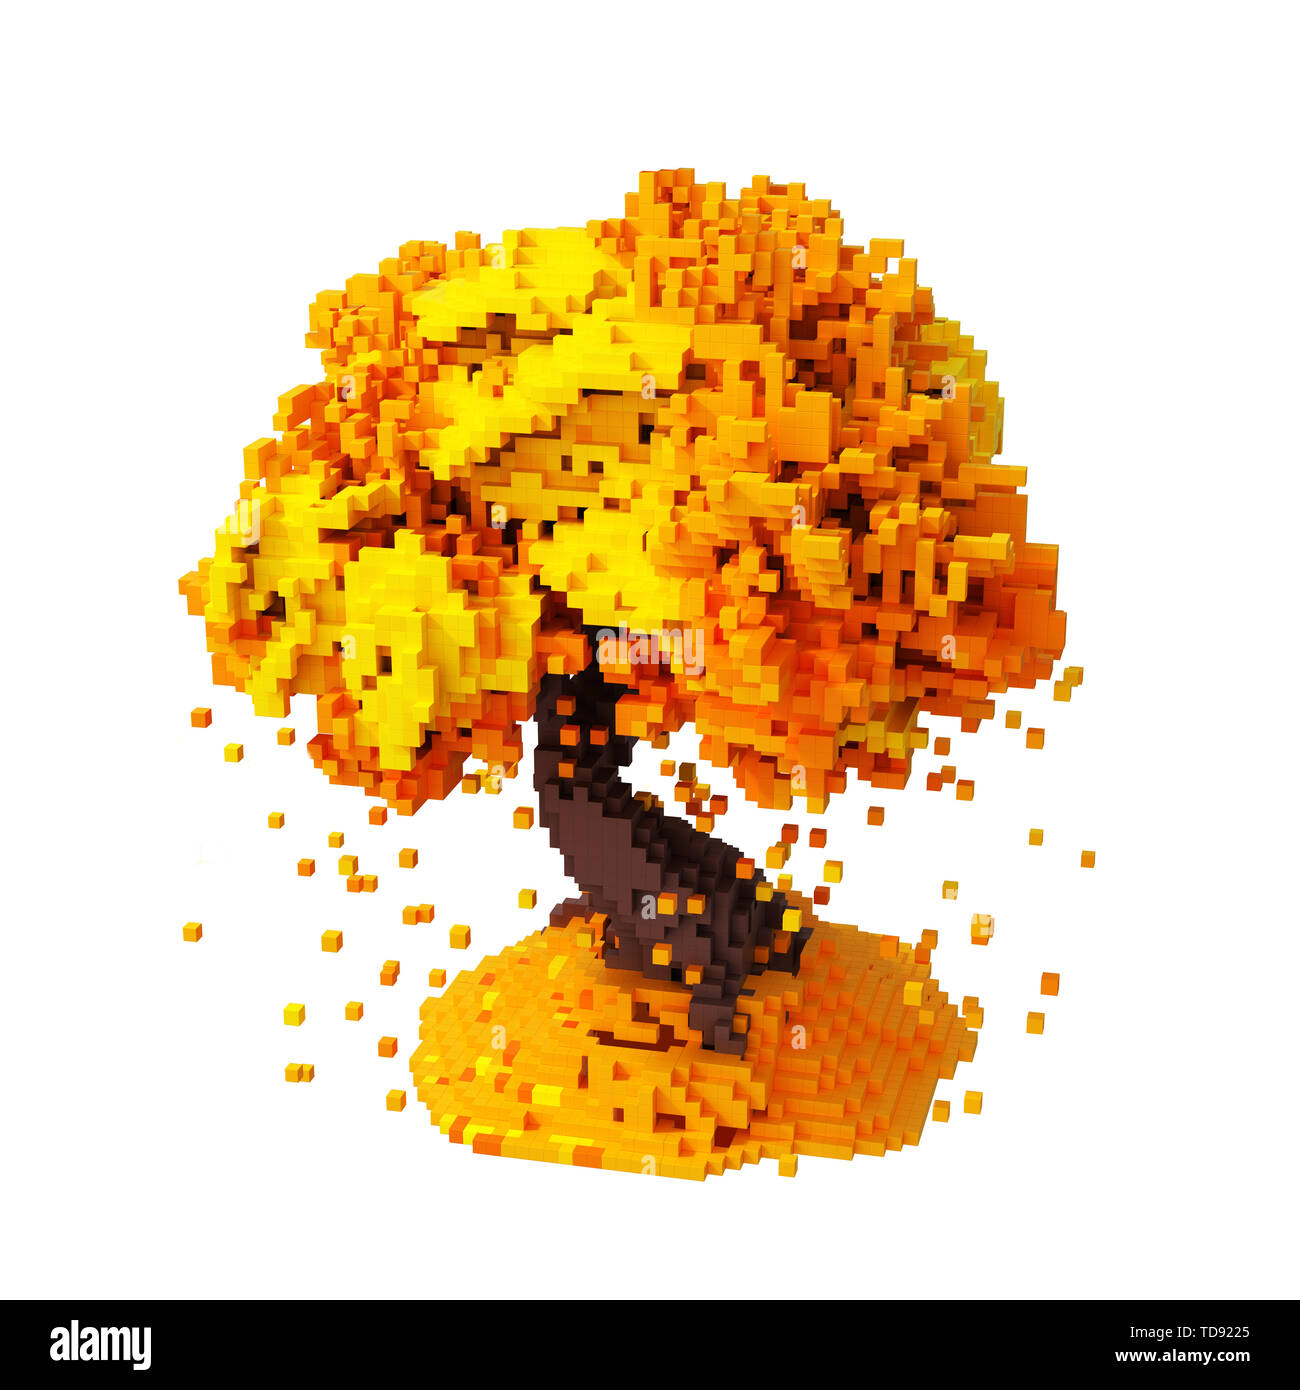 Digital Pixelated Falling Leaves From An Autumn Tree Isolated Over White Background. 3D Illustration. Stock Photo